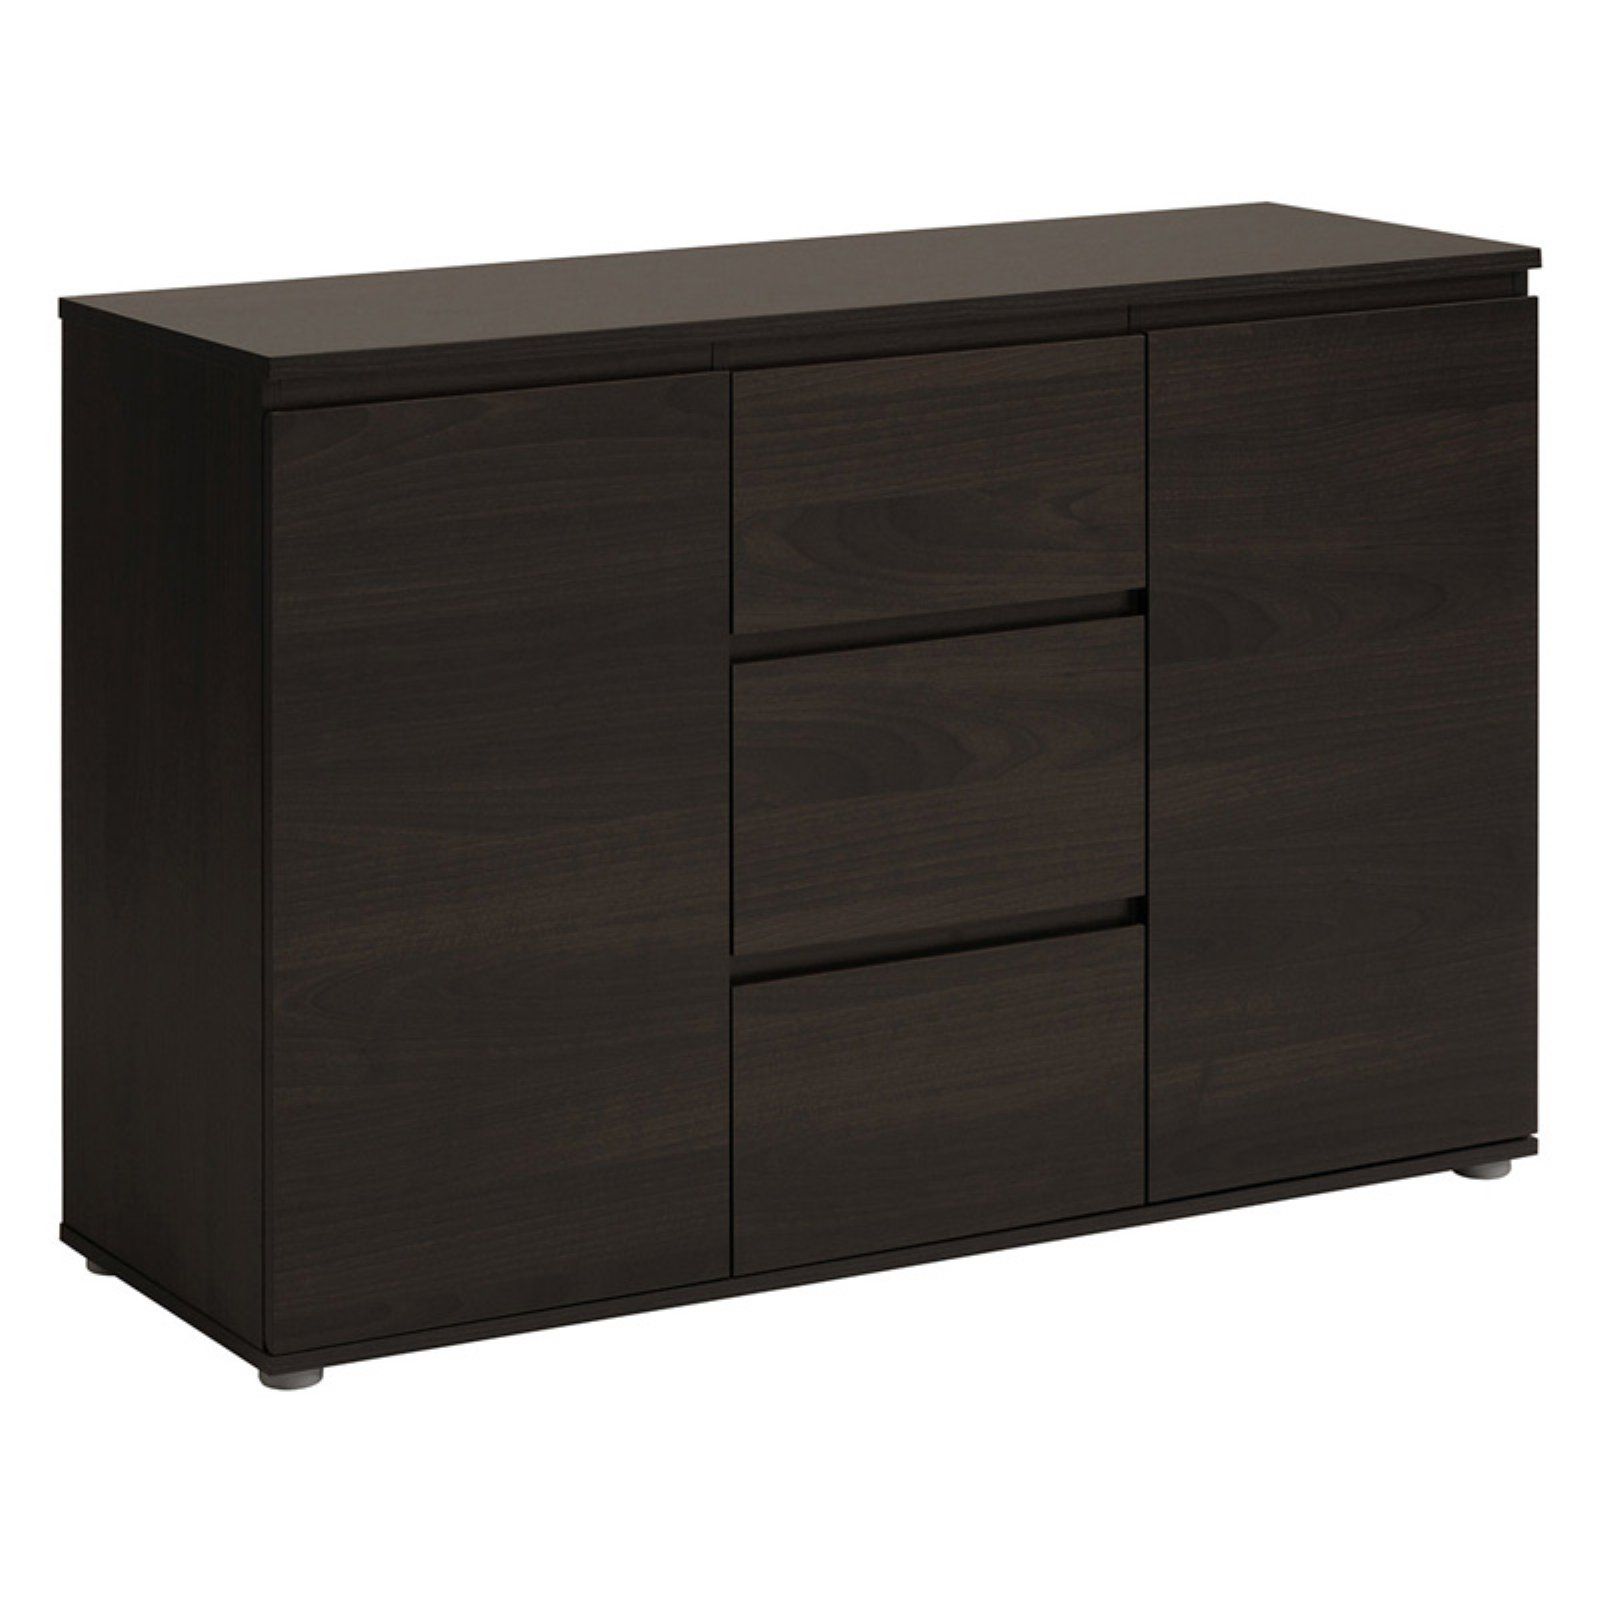 Parisot Neo Sideboard | Products In 2019 | Sideboard Pertaining To Most Up To Date Wendell Sideboards (Photo 14 of 20)